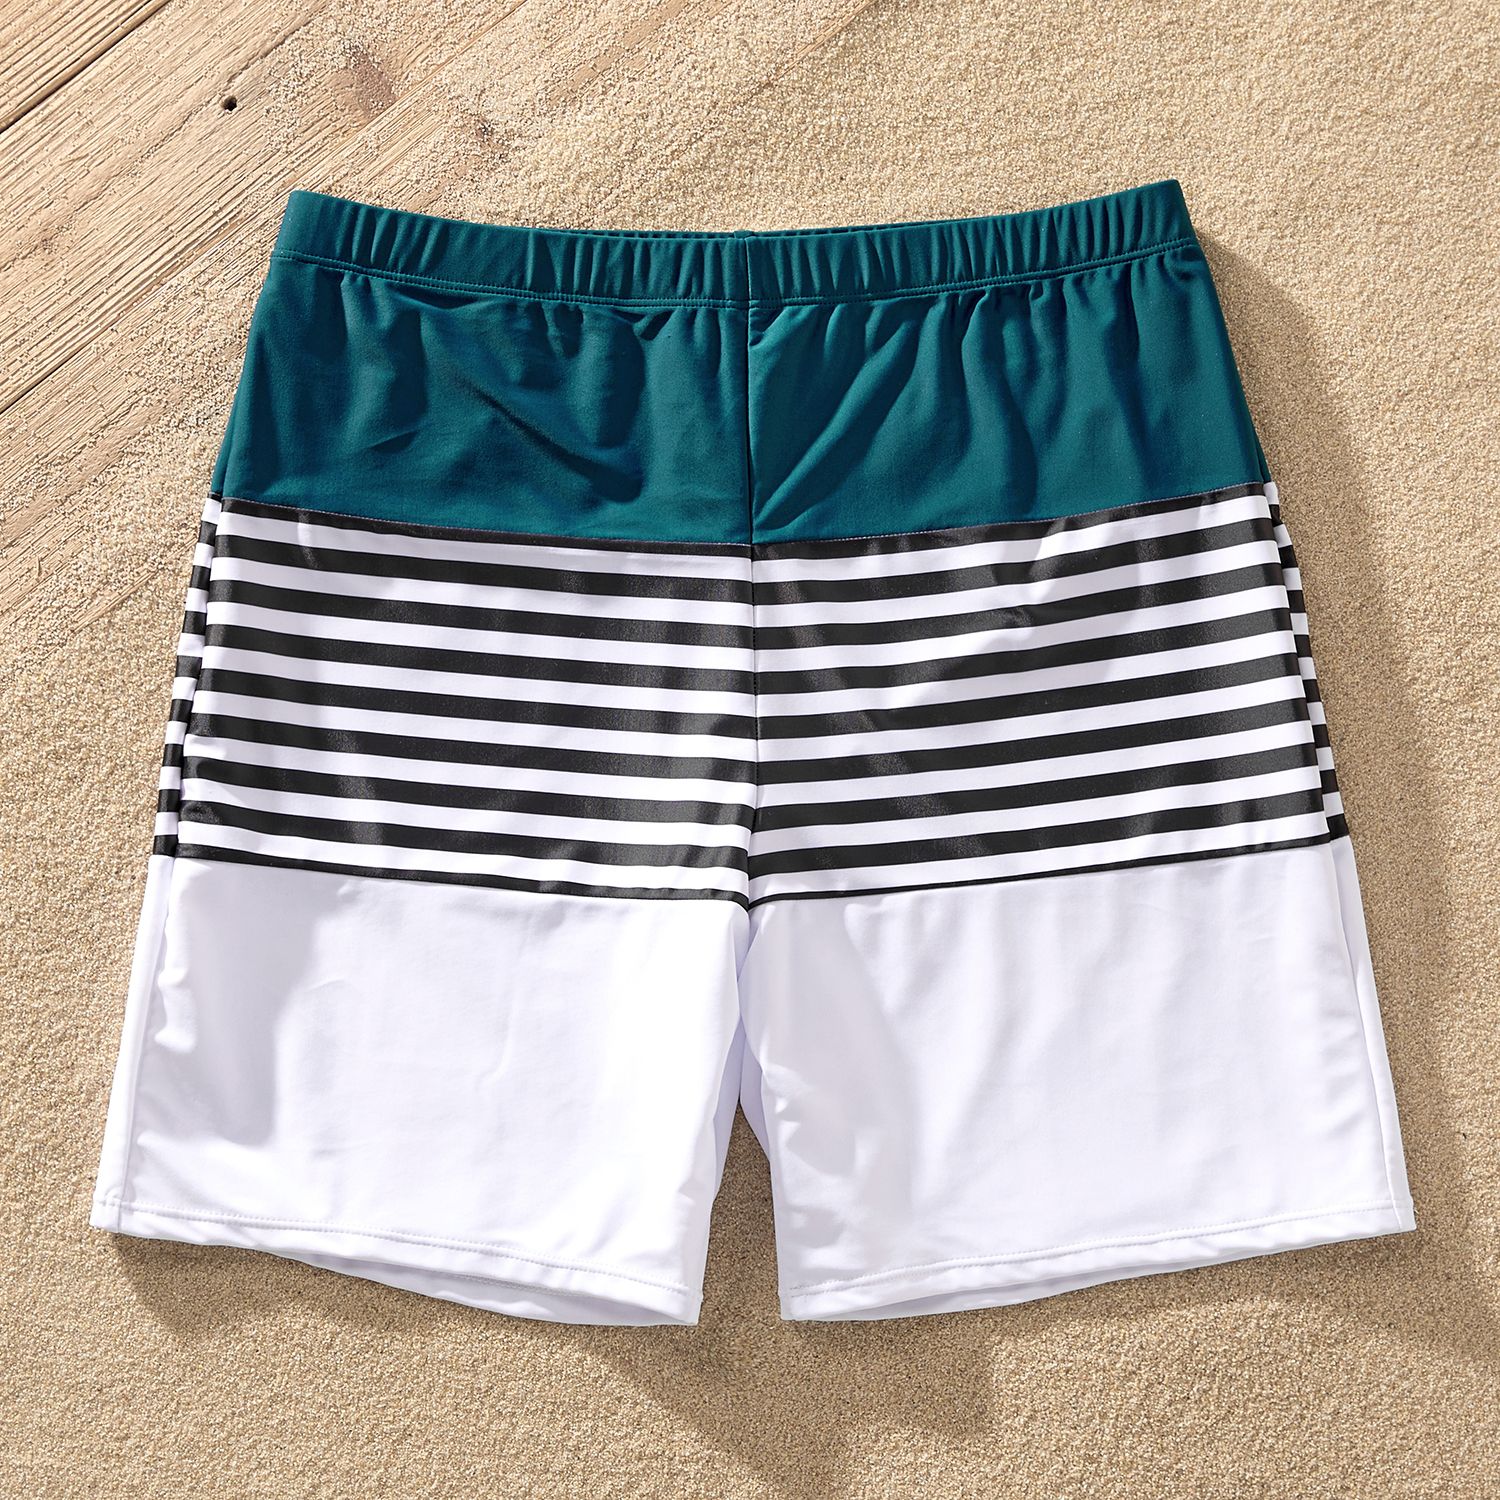 Family Matching Two Tone One-piece Swimsuit Or Stripe Panel Swim Trunks Shorts